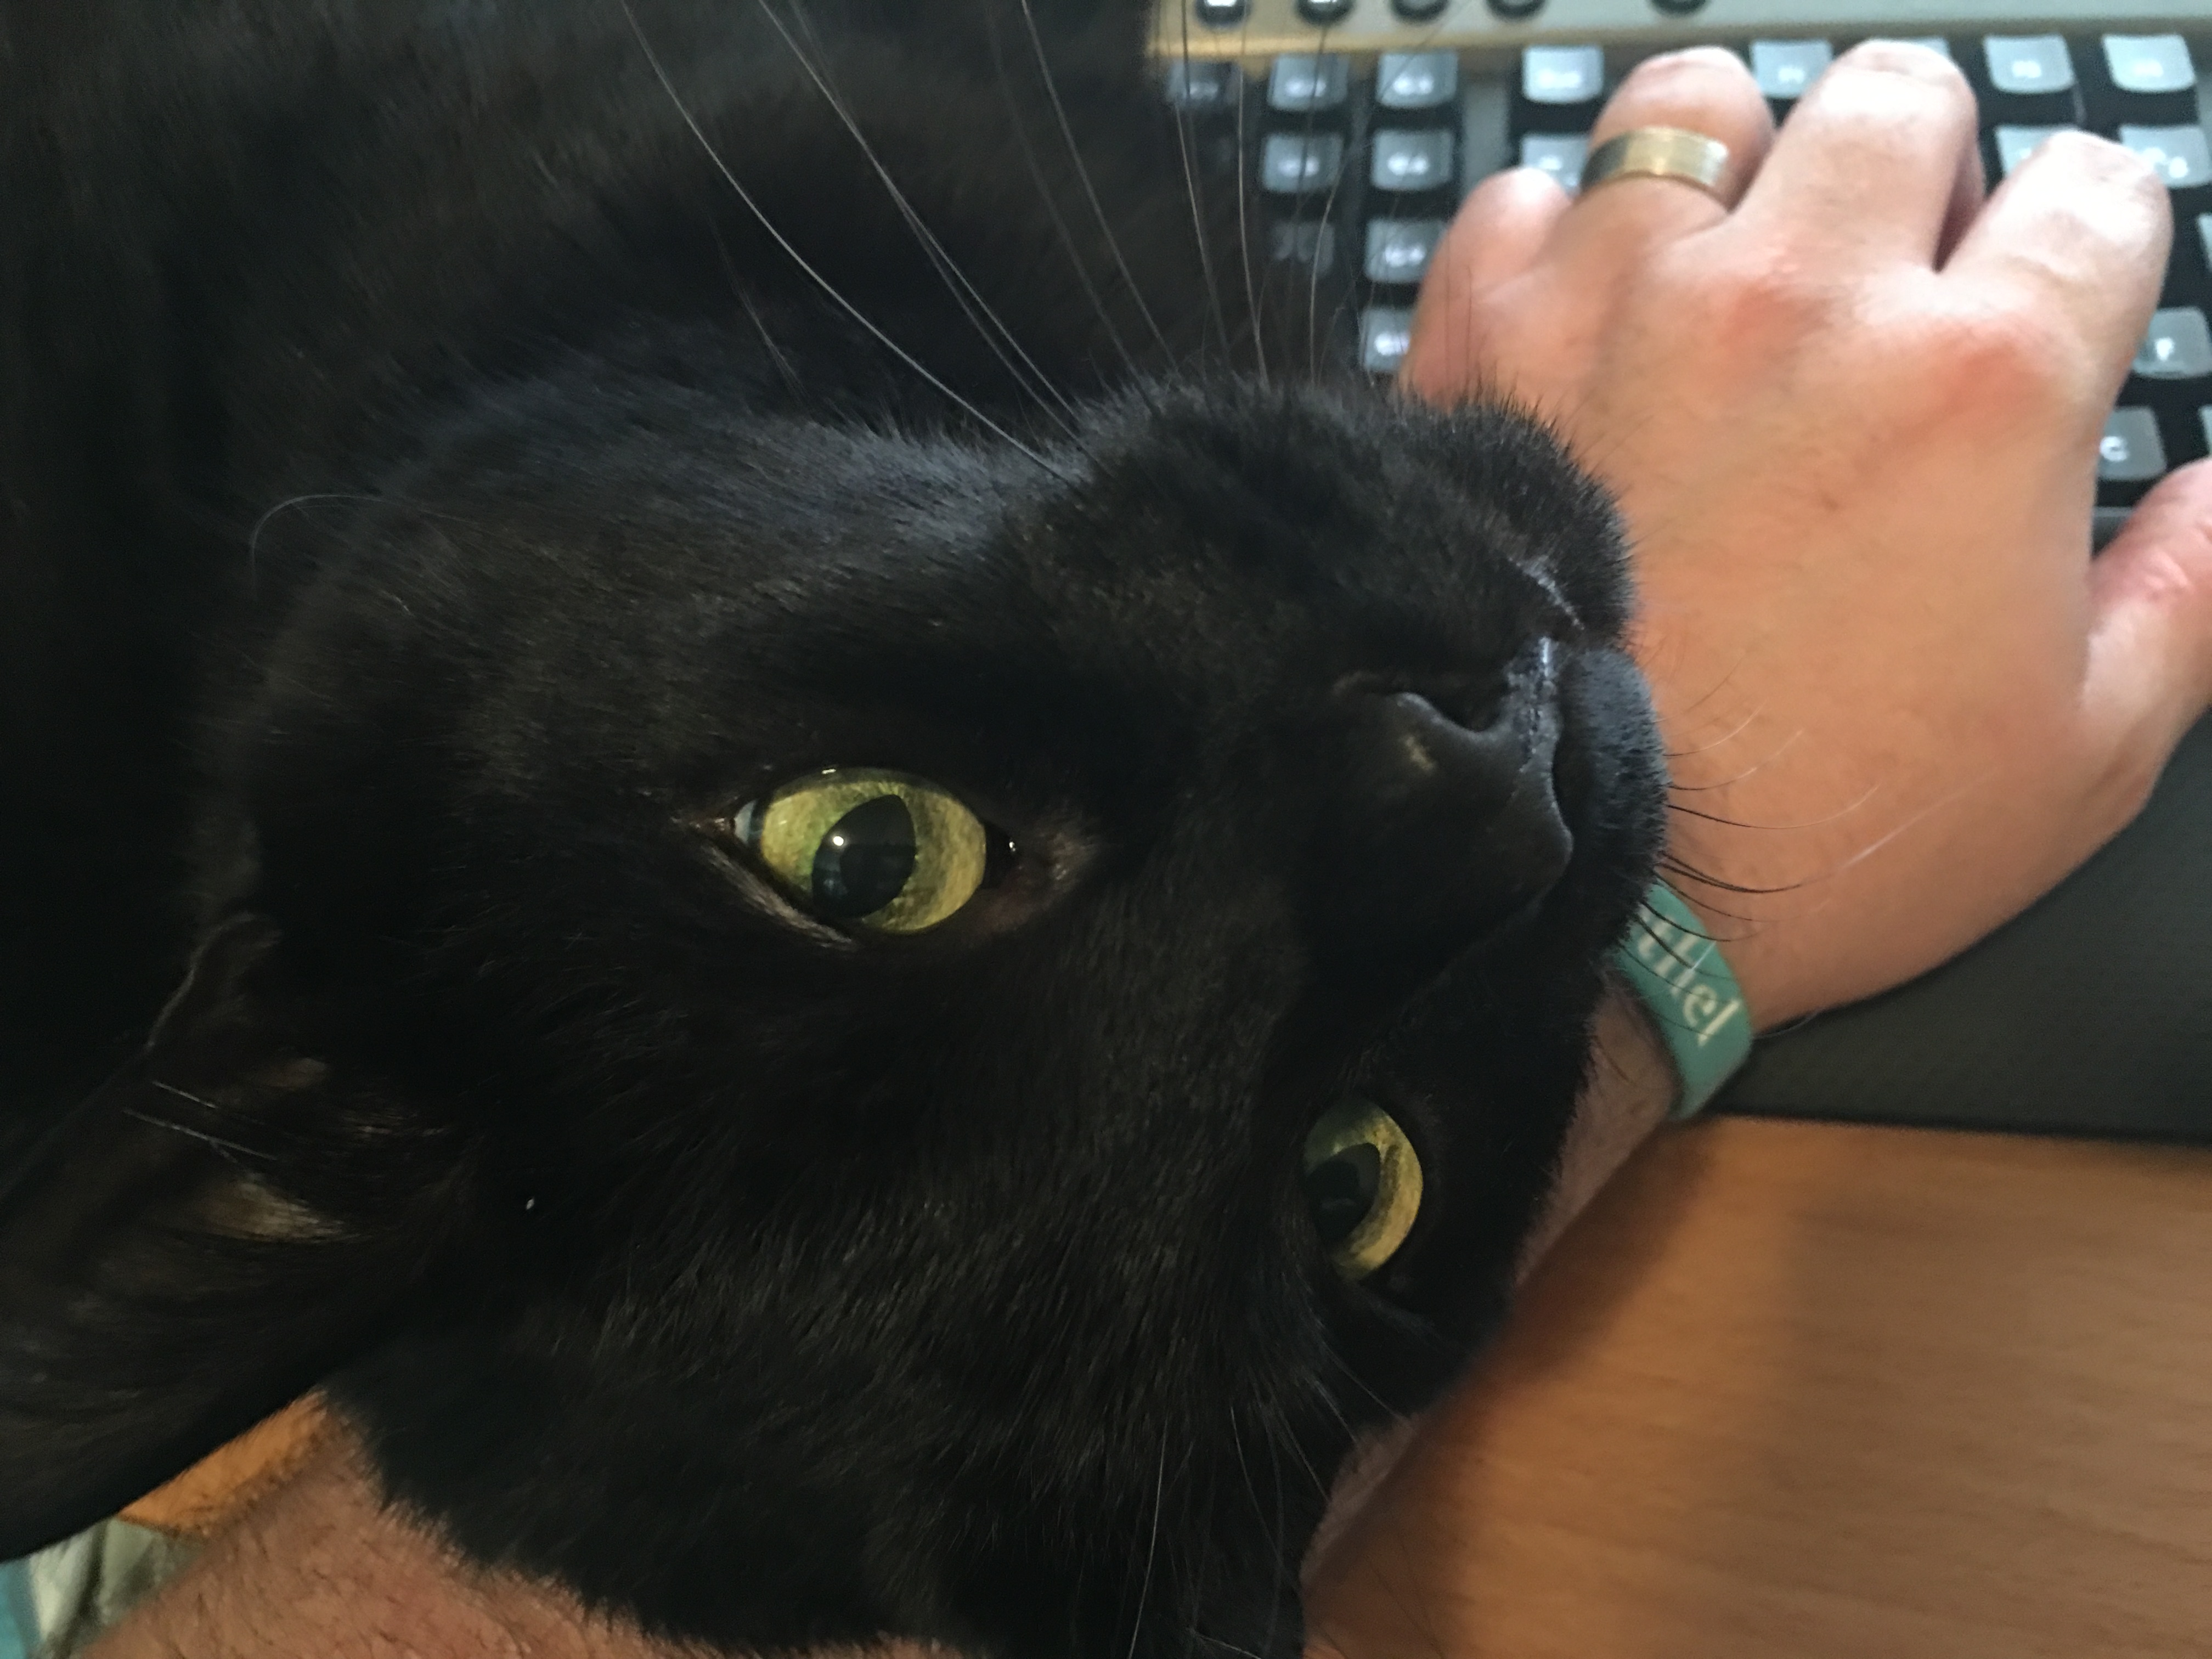 Manny laying on my hand while I work. He loved to be around us.